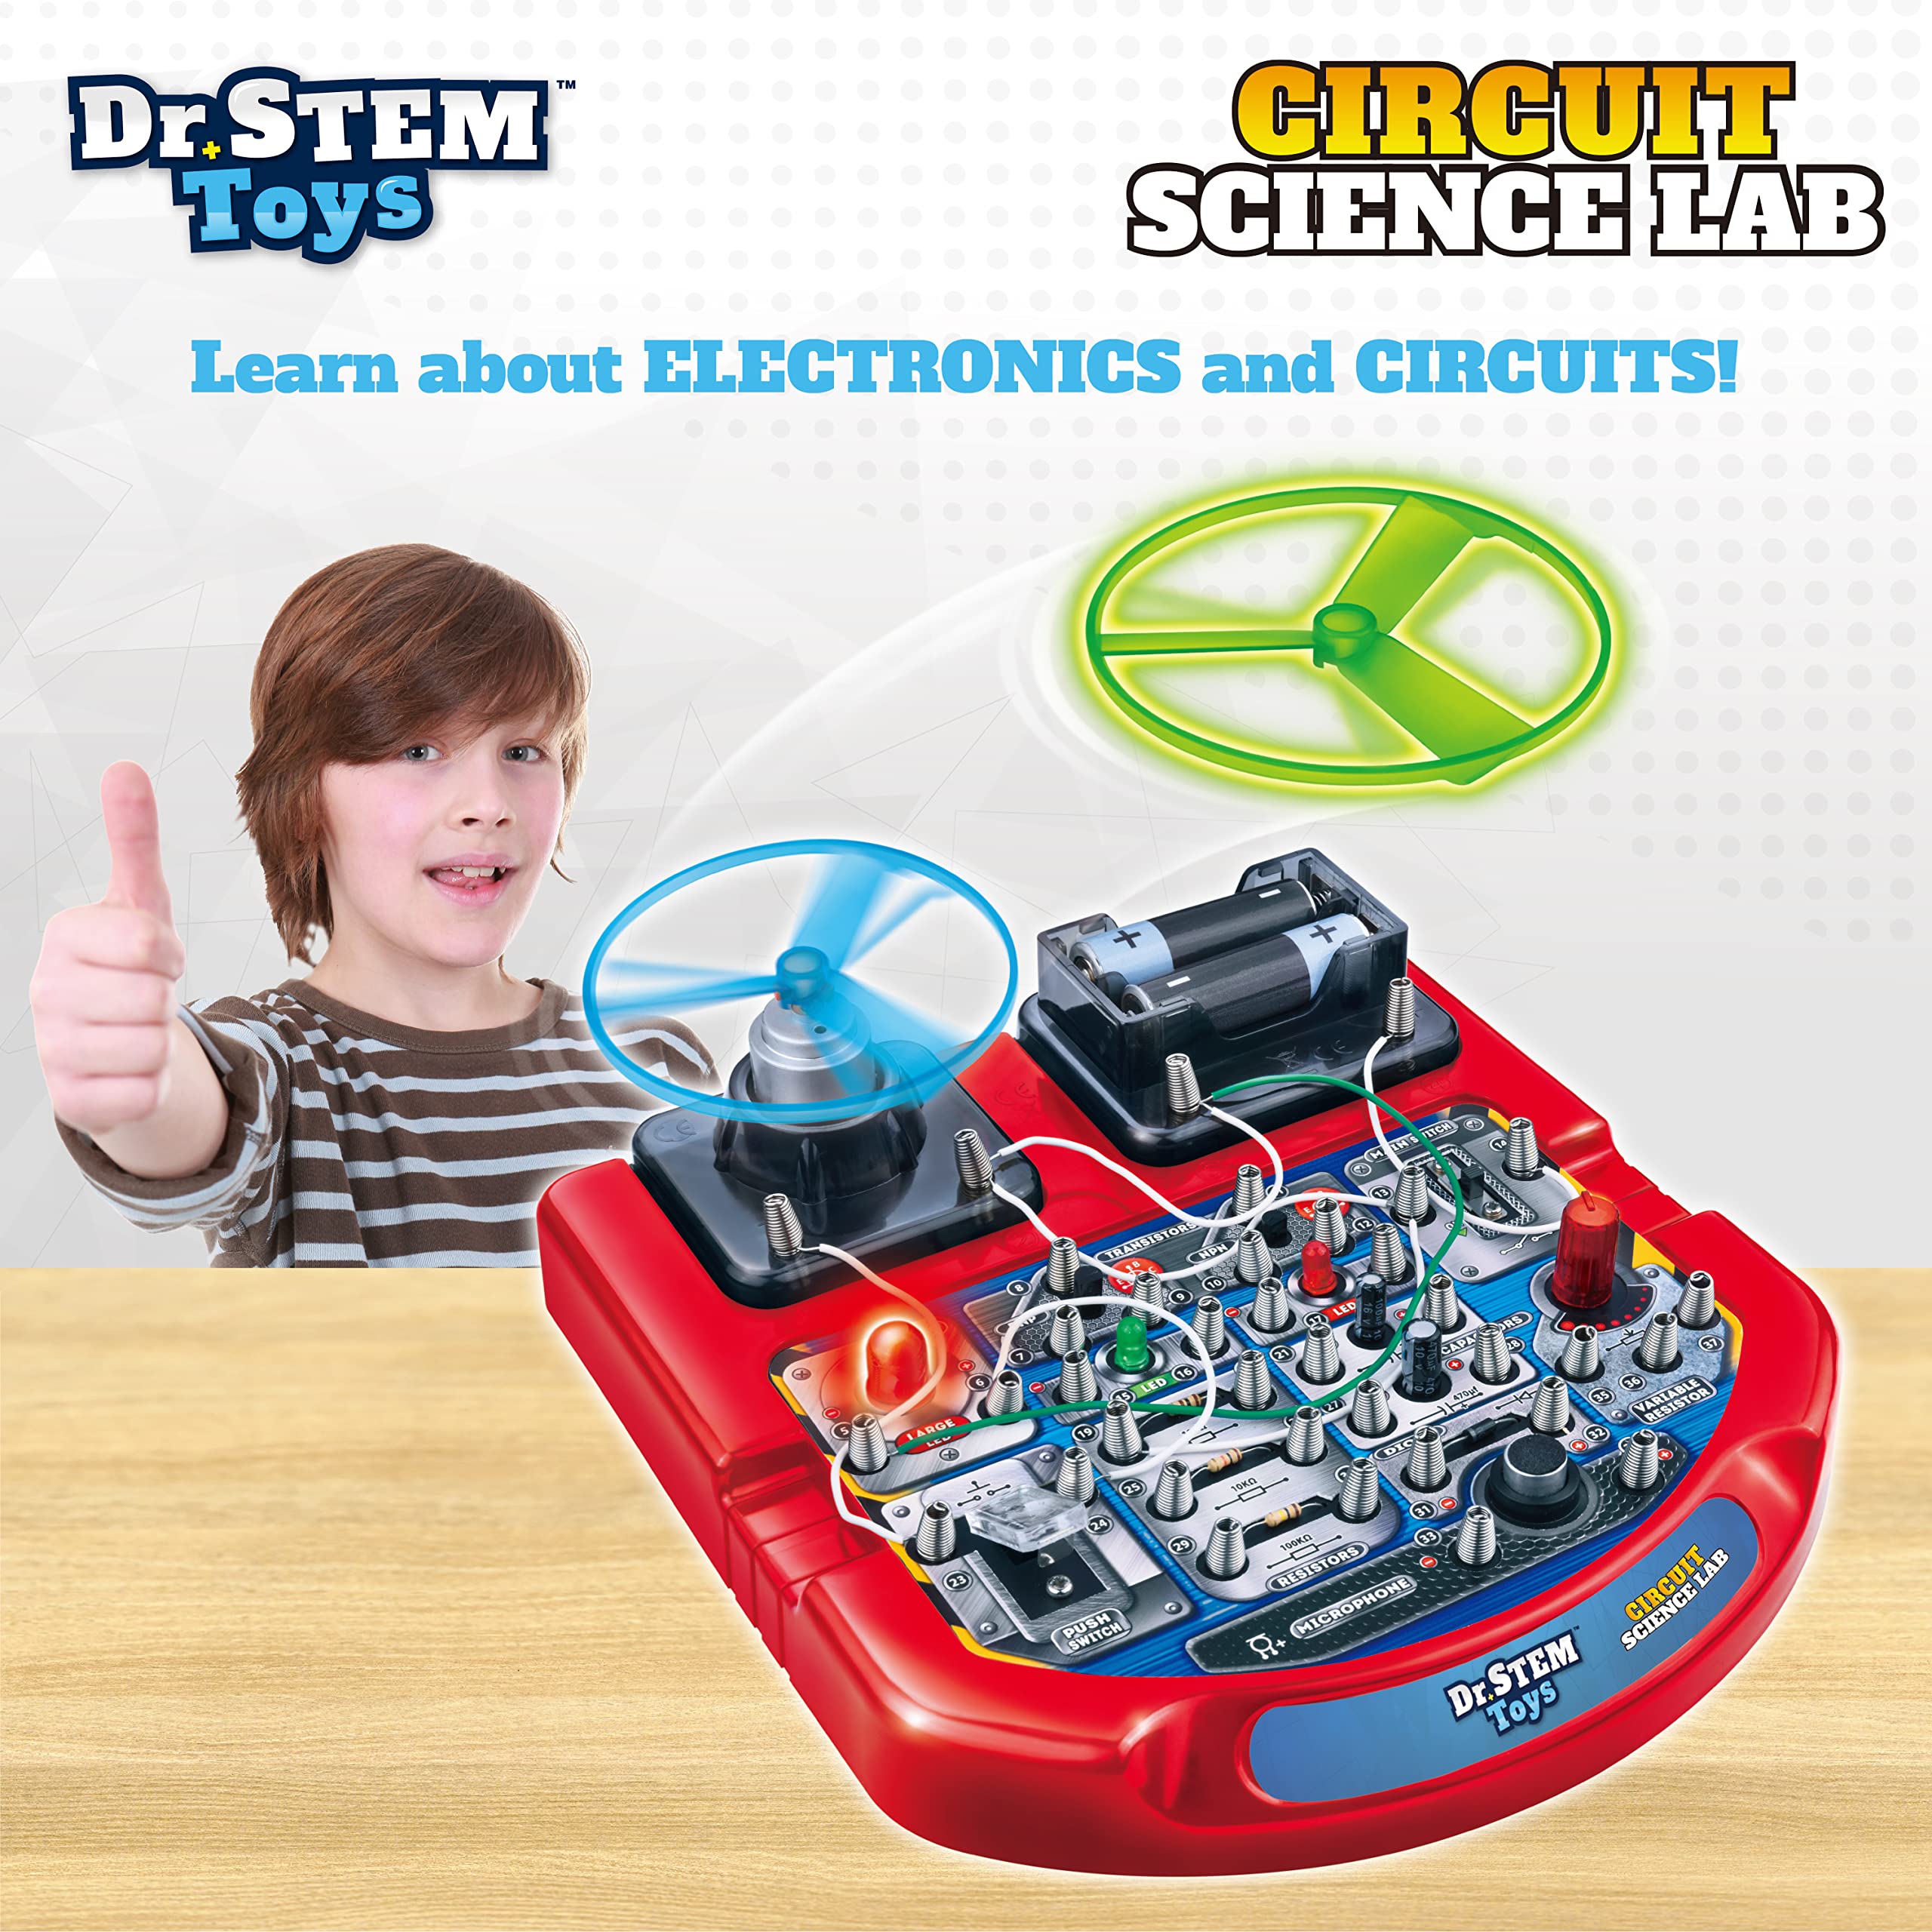 Dr. STEM Toys Circuit Board for Kids | Fun Educational Science Kit with Real Wires, LED Lights & a Fan That Actually Flies | Includes 18 Cool Science Experiments for Boys & Girls Ages 8 & Up